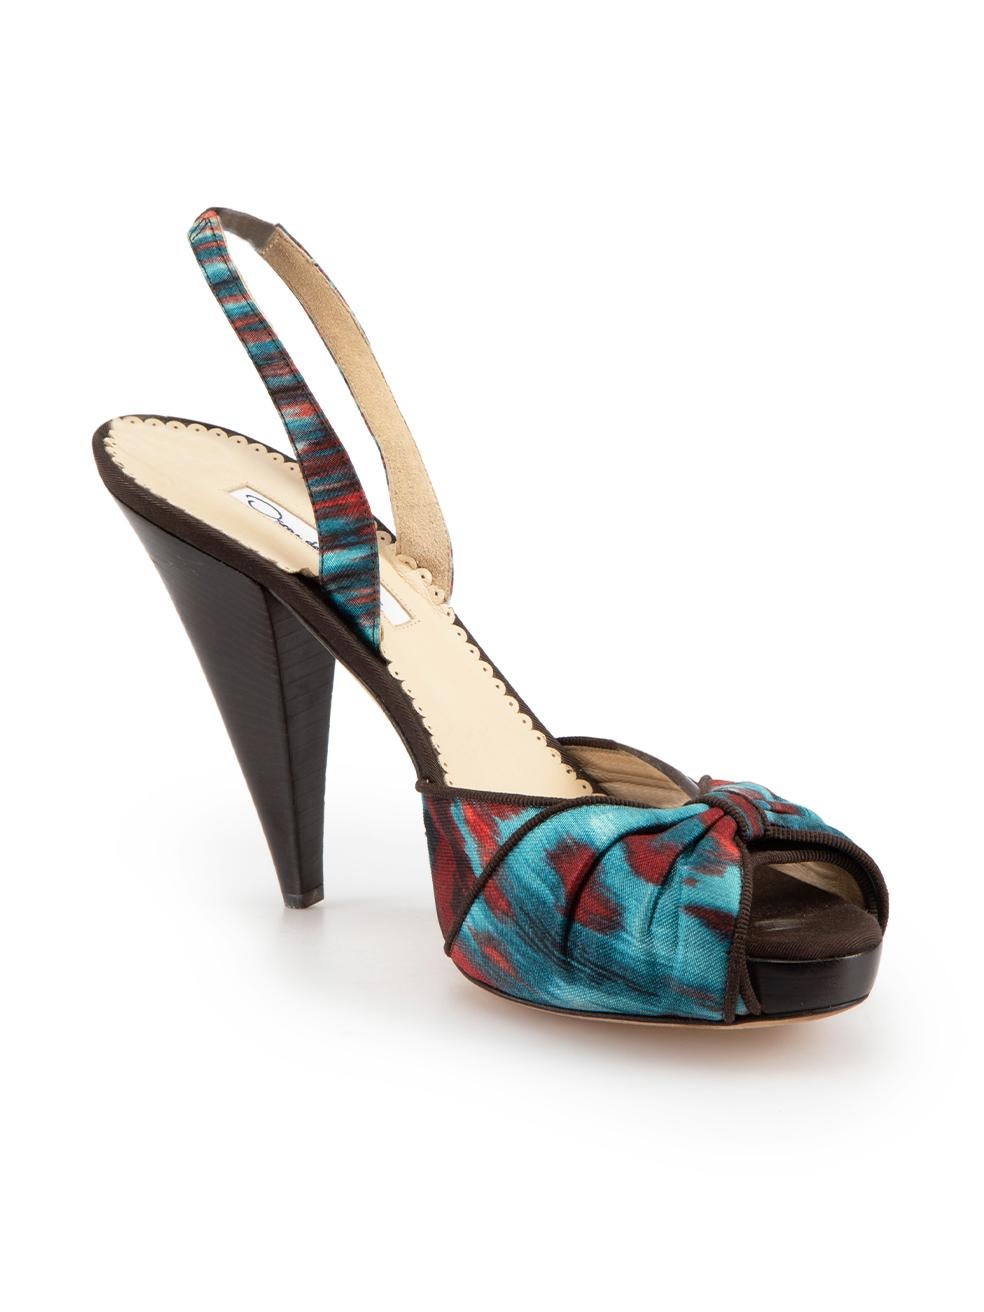 CONDITION is Very good. Minimal wear to heels is evident. Minimal indentations to back of heels on this used Oscar de la Renta designer resale item.
  
Details
Multicolour
Cloth
Heels
Tie-dye pattern
Peep toe
Slingback
High heeled

Made in